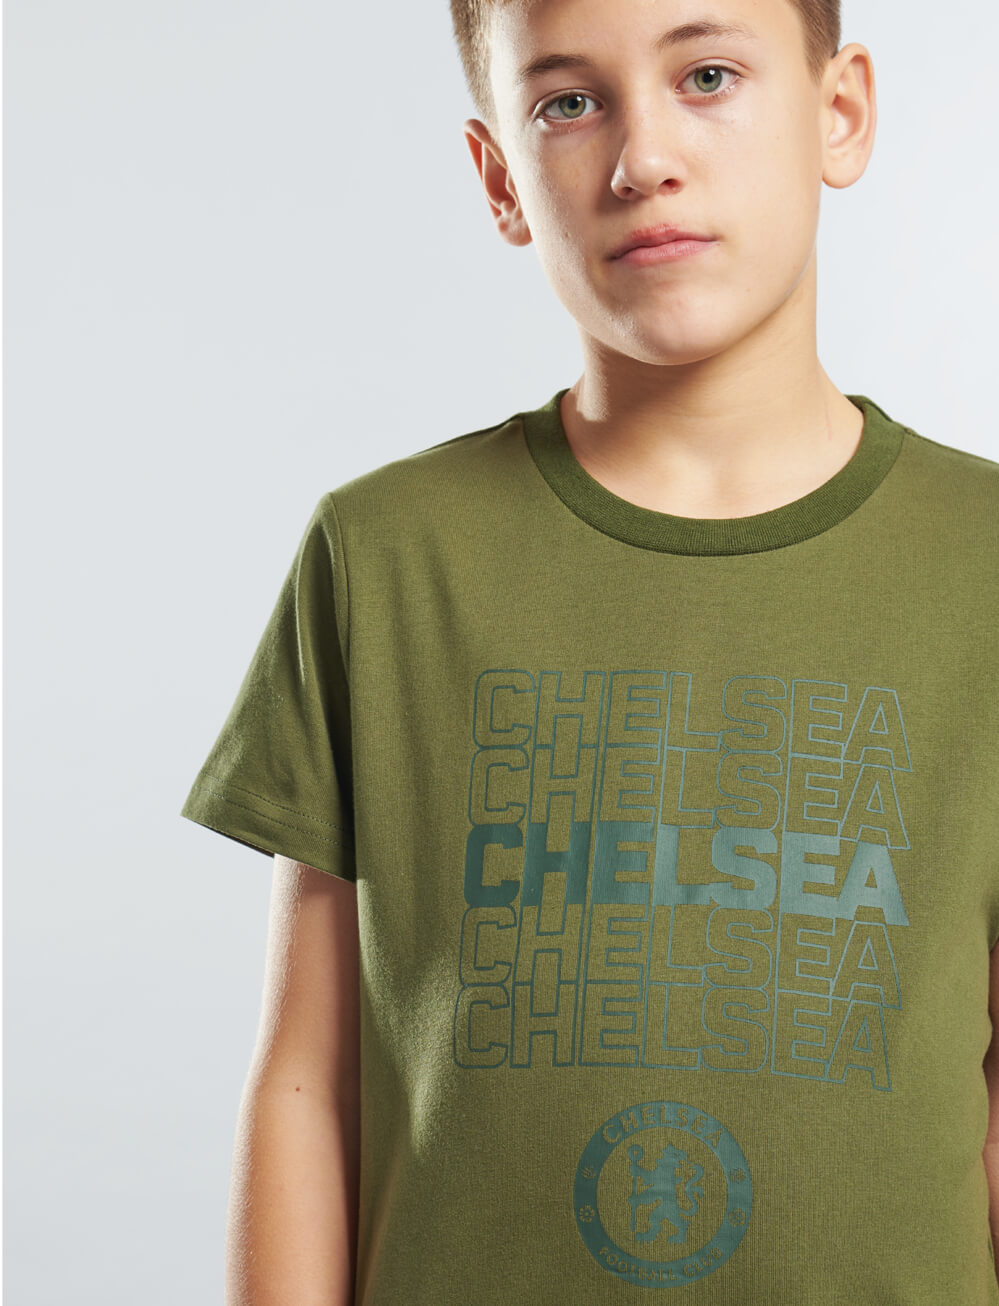 Official Chelsea Kids Graphic T-Shirt - Cypress - The World Football Store